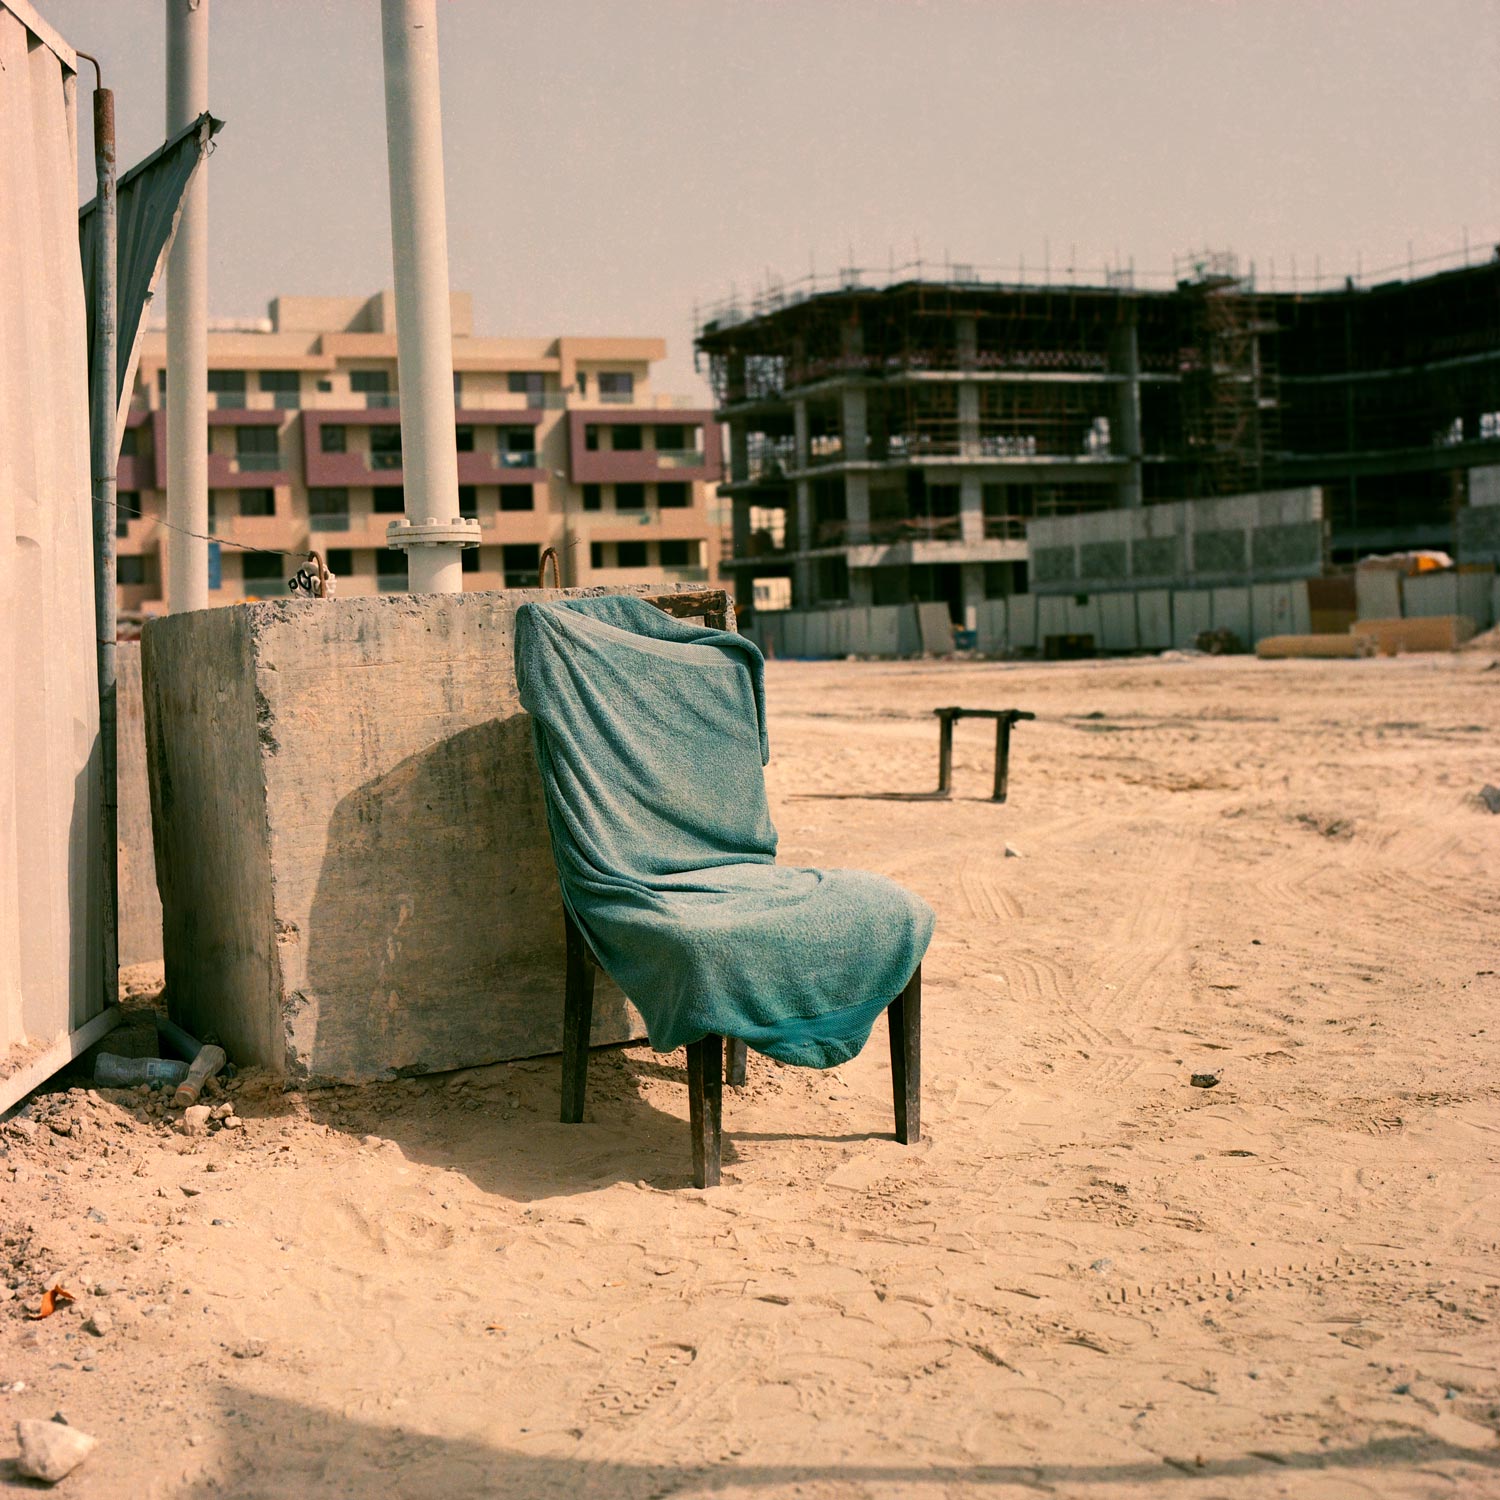 Towel covered chair at a construction site in Dubai.